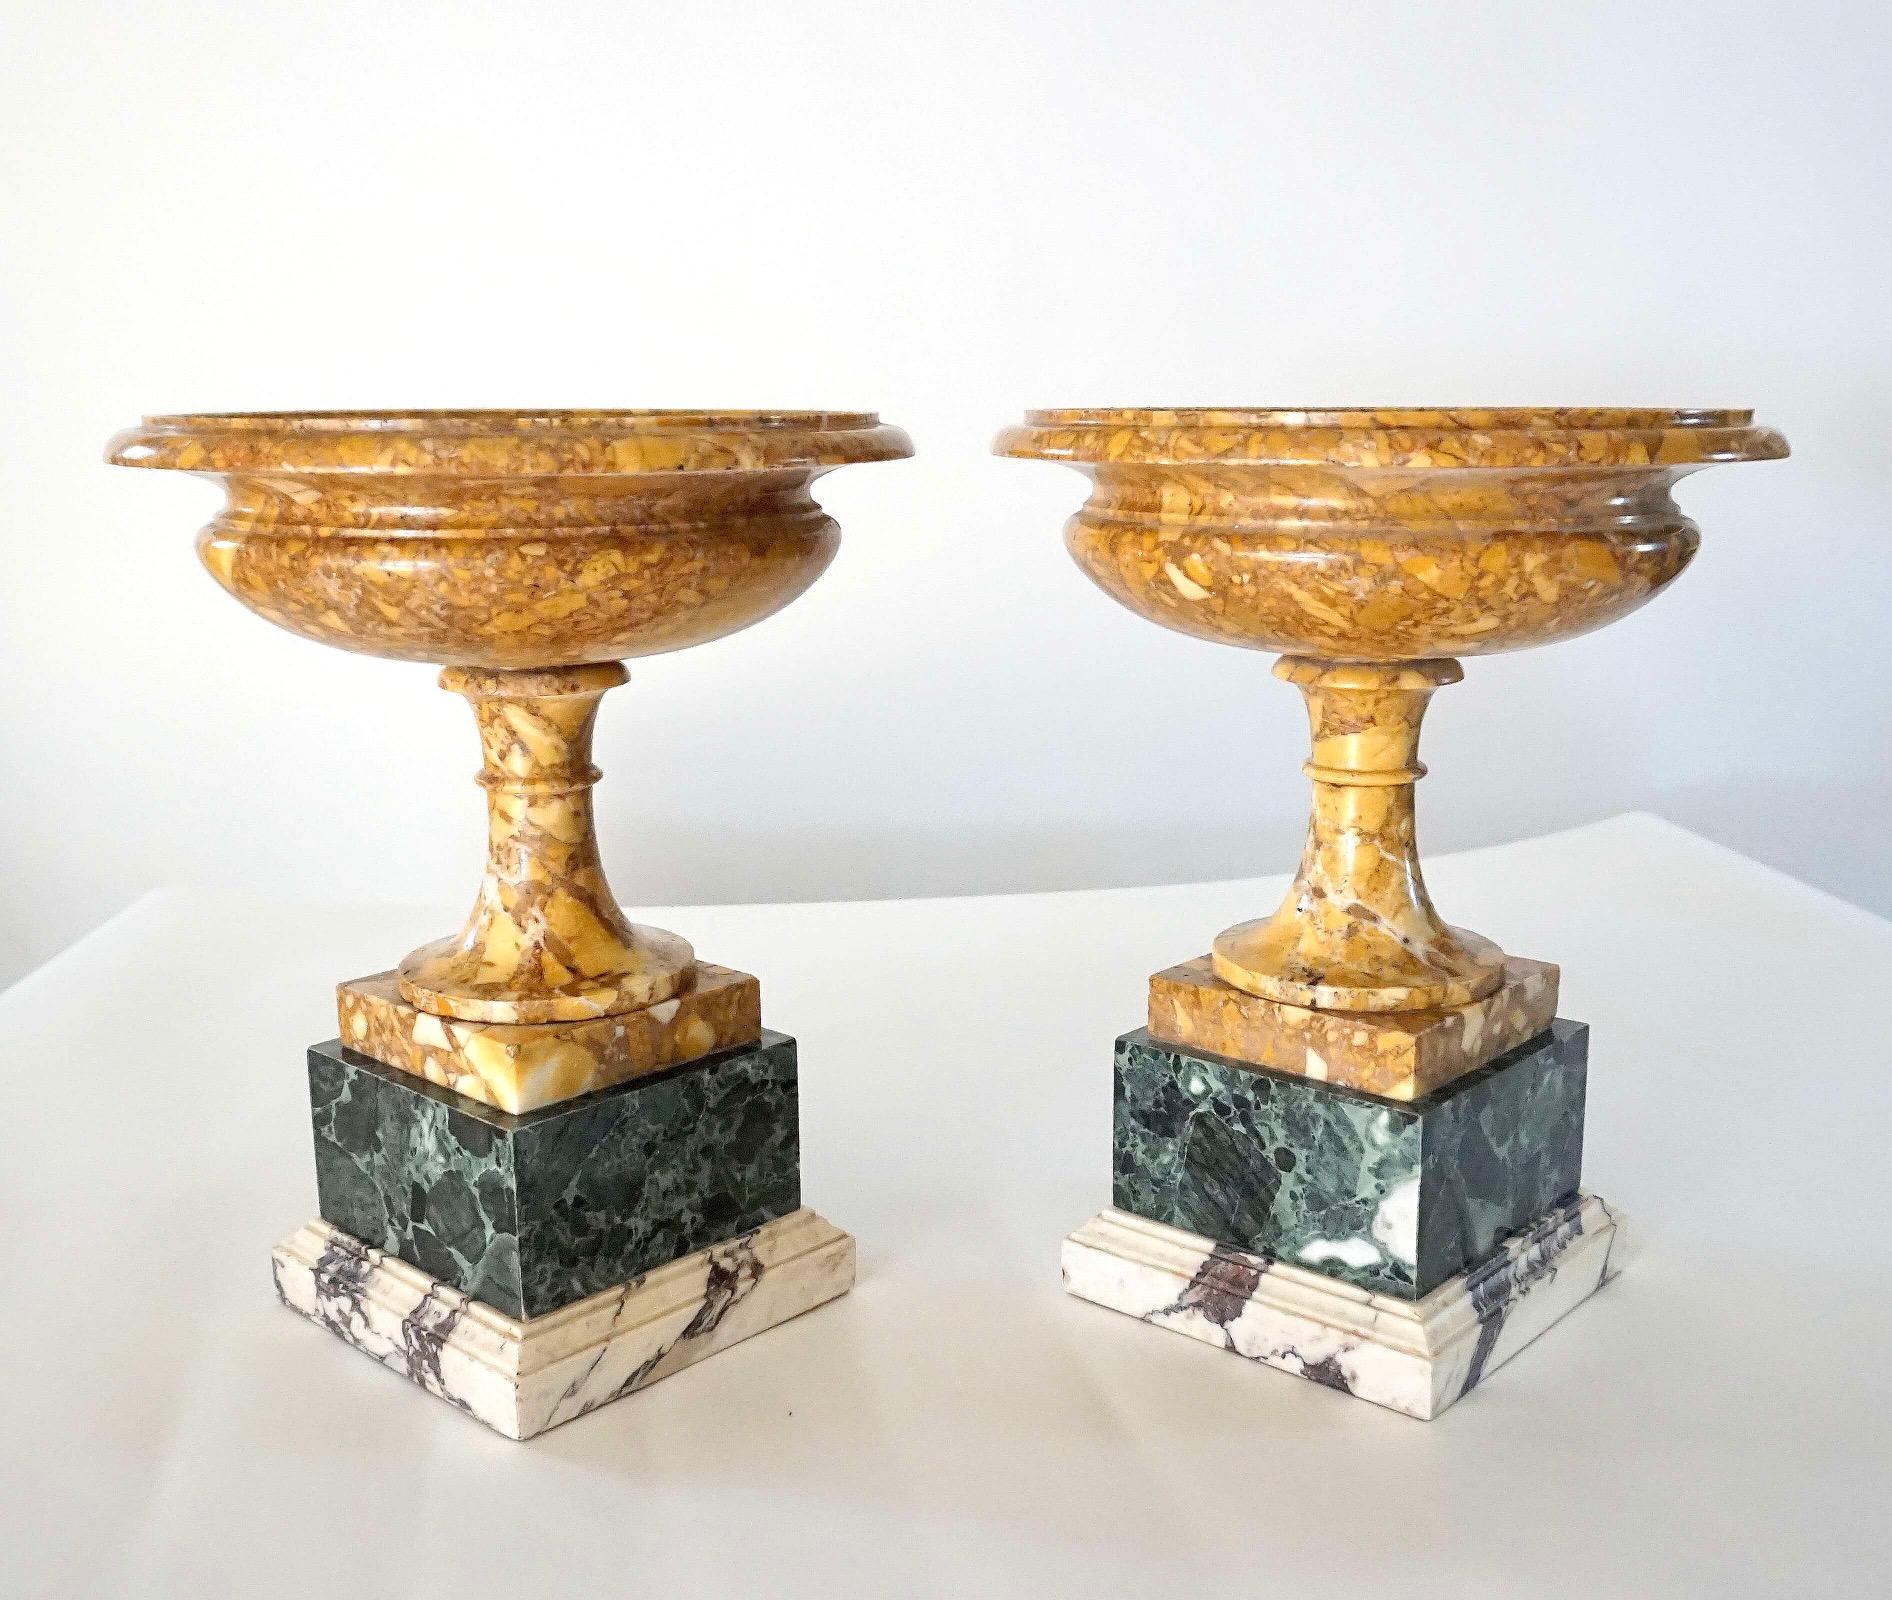 Pair of 19th century Italian 'grand tour' tazze or shallow urns of neoclassical form composed of ancient Roman marbles; the tazze having round giallo antico bowls and socles on square verde antico and pavonazzetto plinths.  Height of tazze alone is